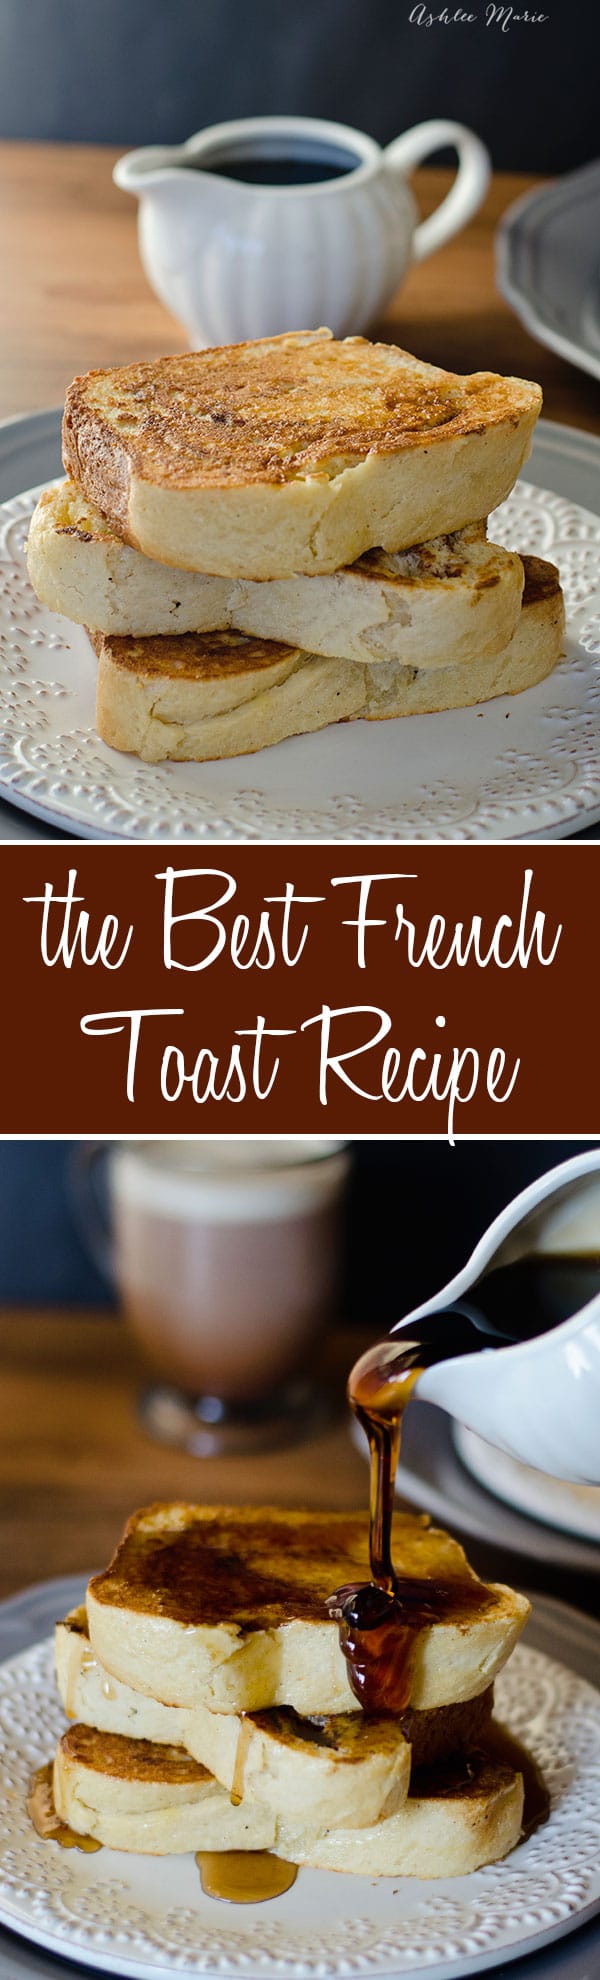 A super easy recipe for the best french toast ever. Great flavor and works with all types of bread